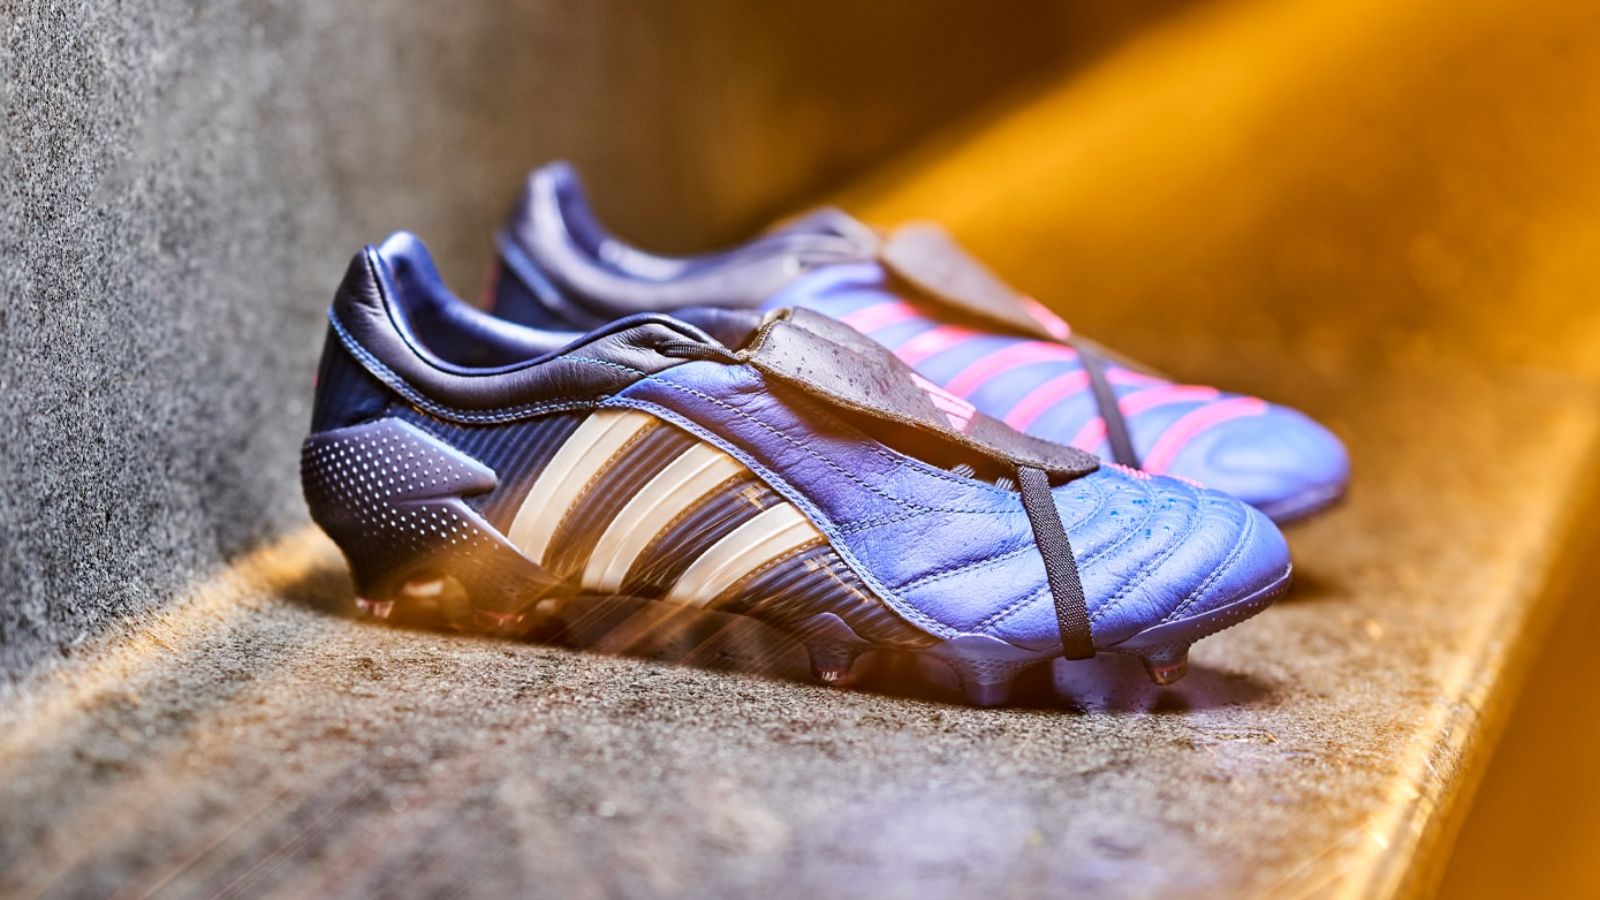 Adidas Pulse Champions League Boots Released - Footy